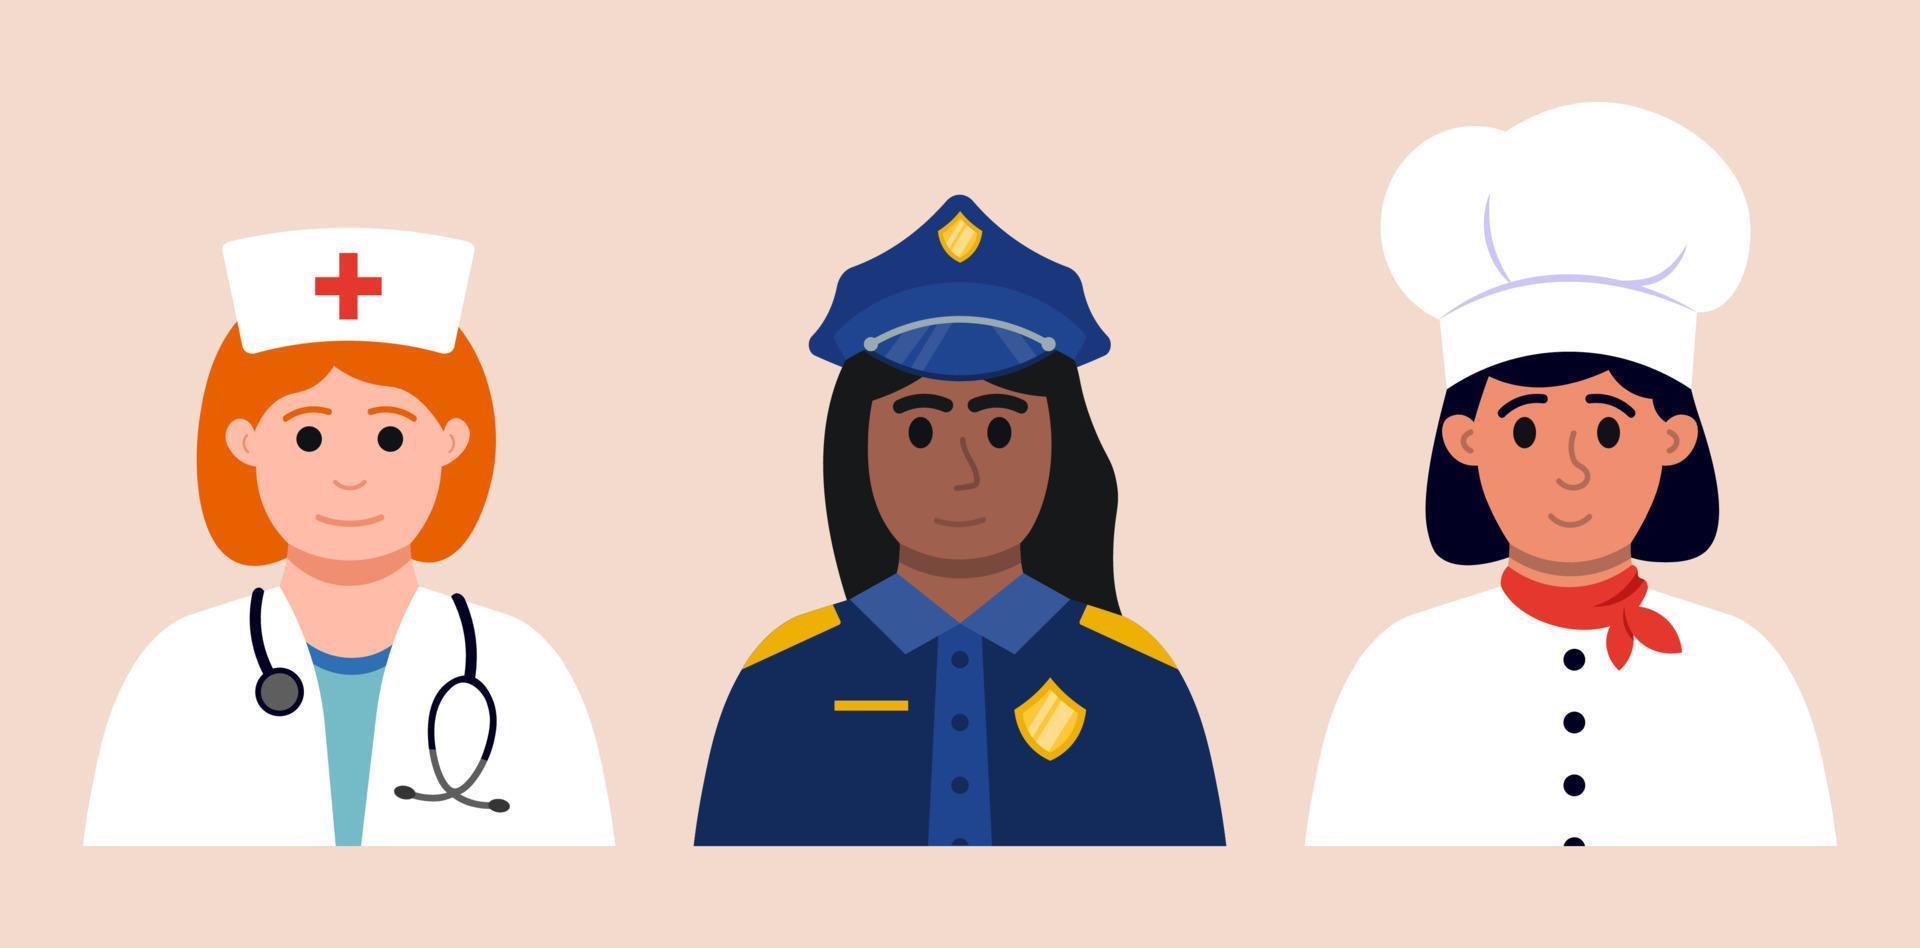 Portraits Of Professional Women, Policewoman, Doctor, Chief Vector Illustration In Flat Style